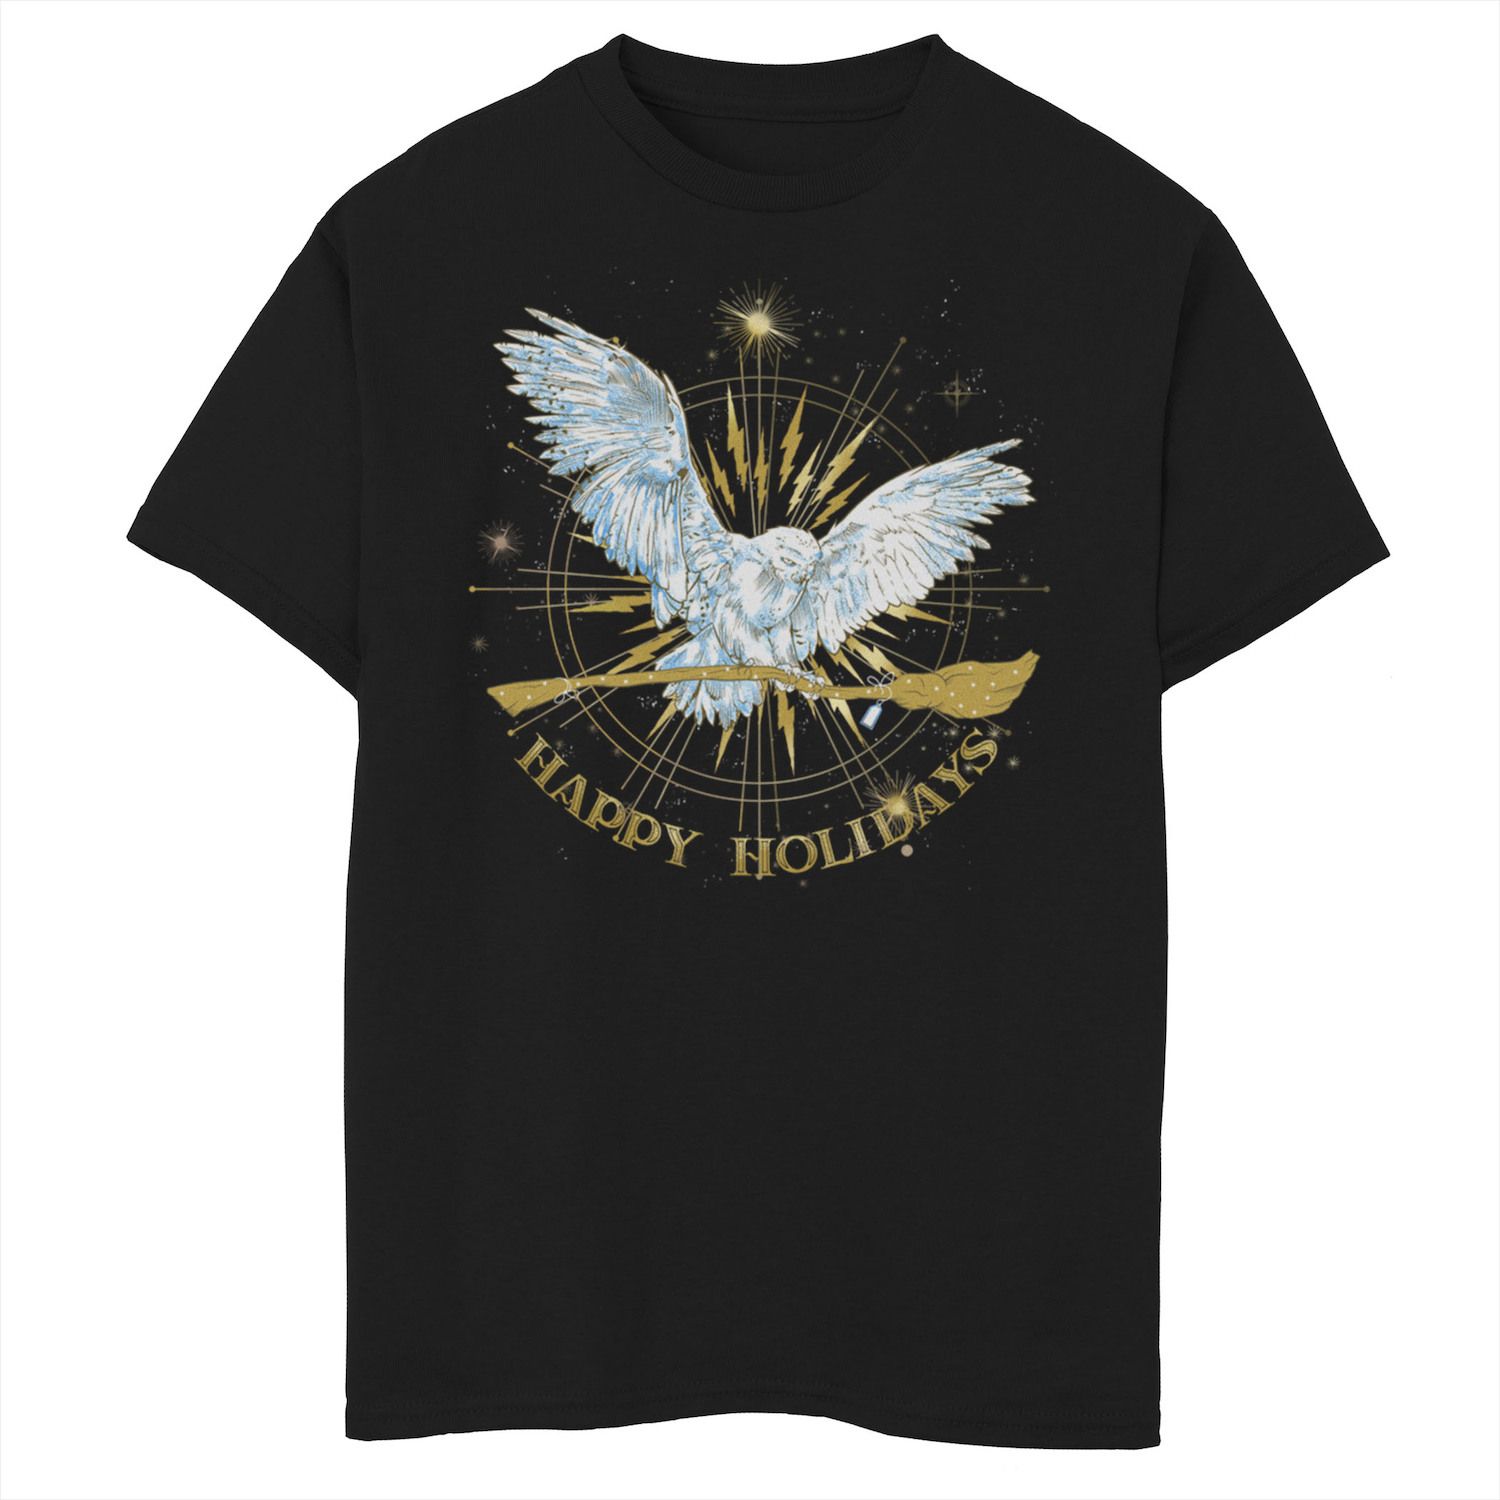 Image for Harry Potter Boys 8-20 Christmas Hedwig Happy Holidays Graphic Tee at Kohl's.